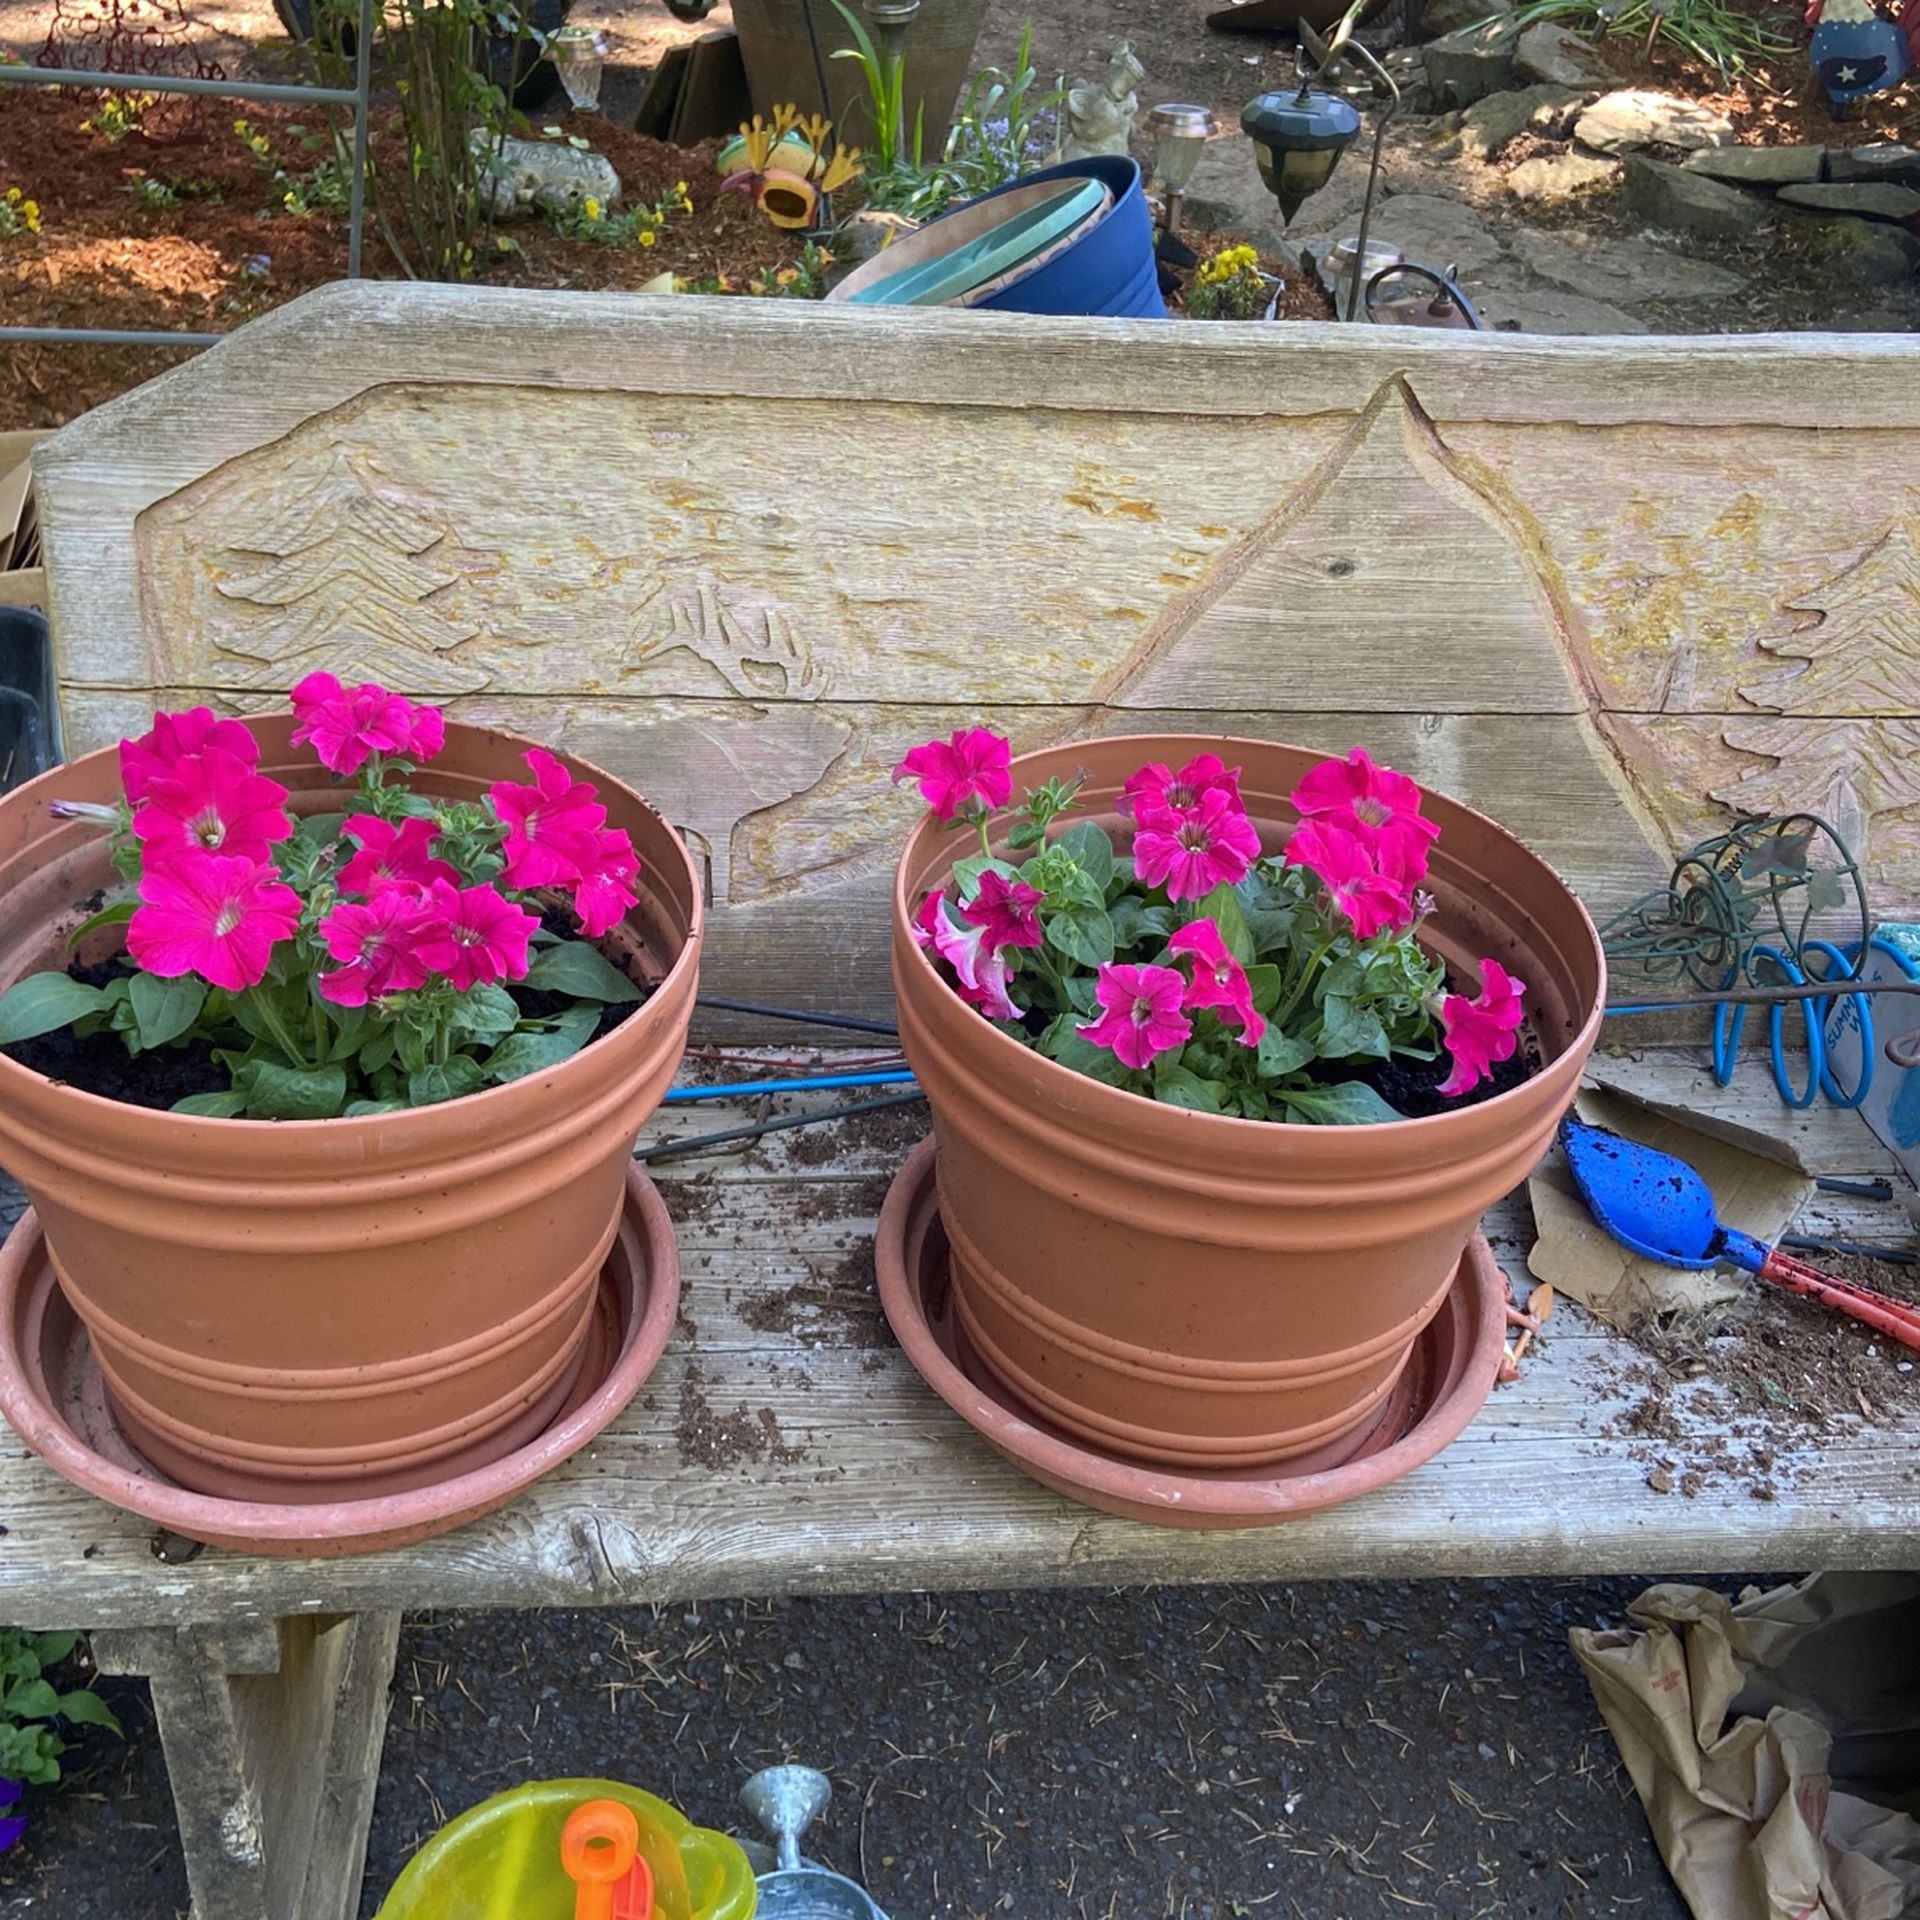 Potted Petunias, 2 Large Pot With Flowers